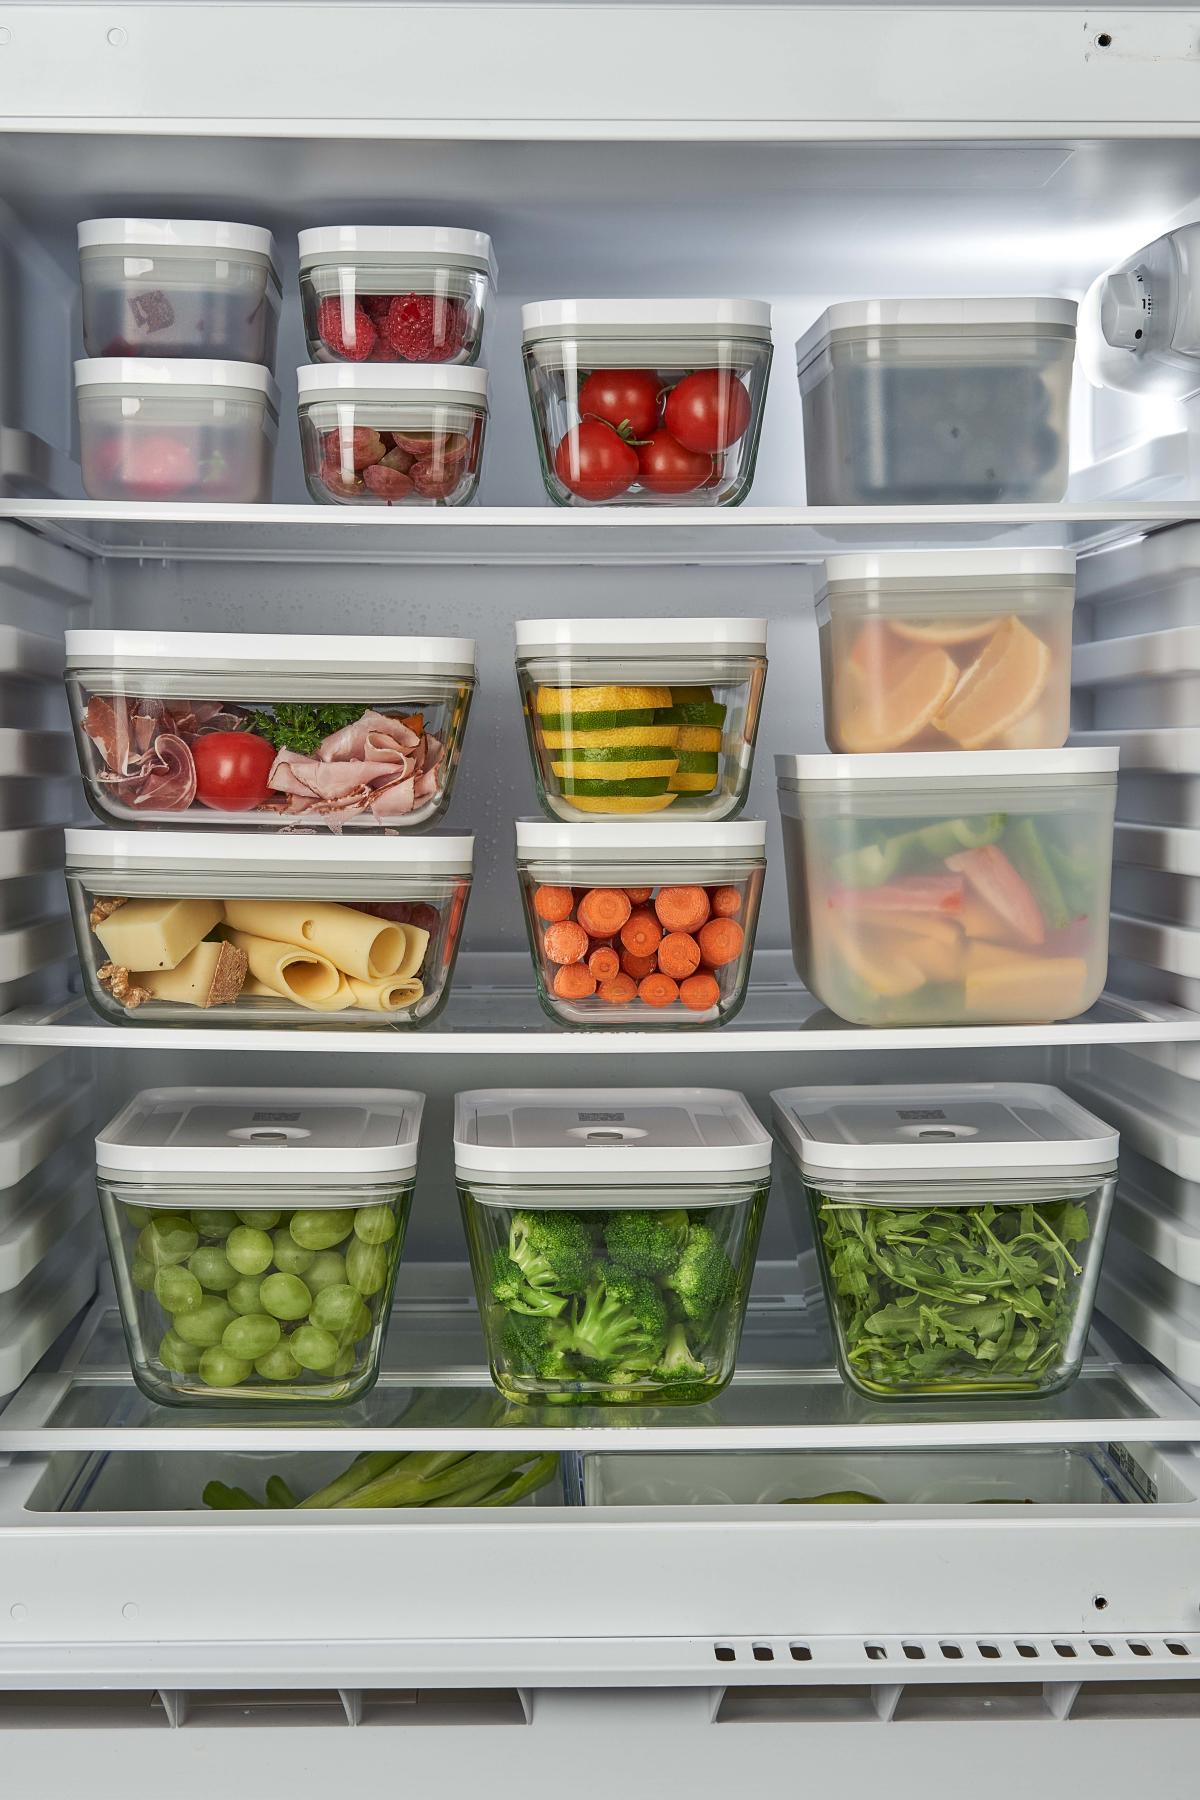 Should You Really Decant Fridge Ingredients Into Storage Containers?